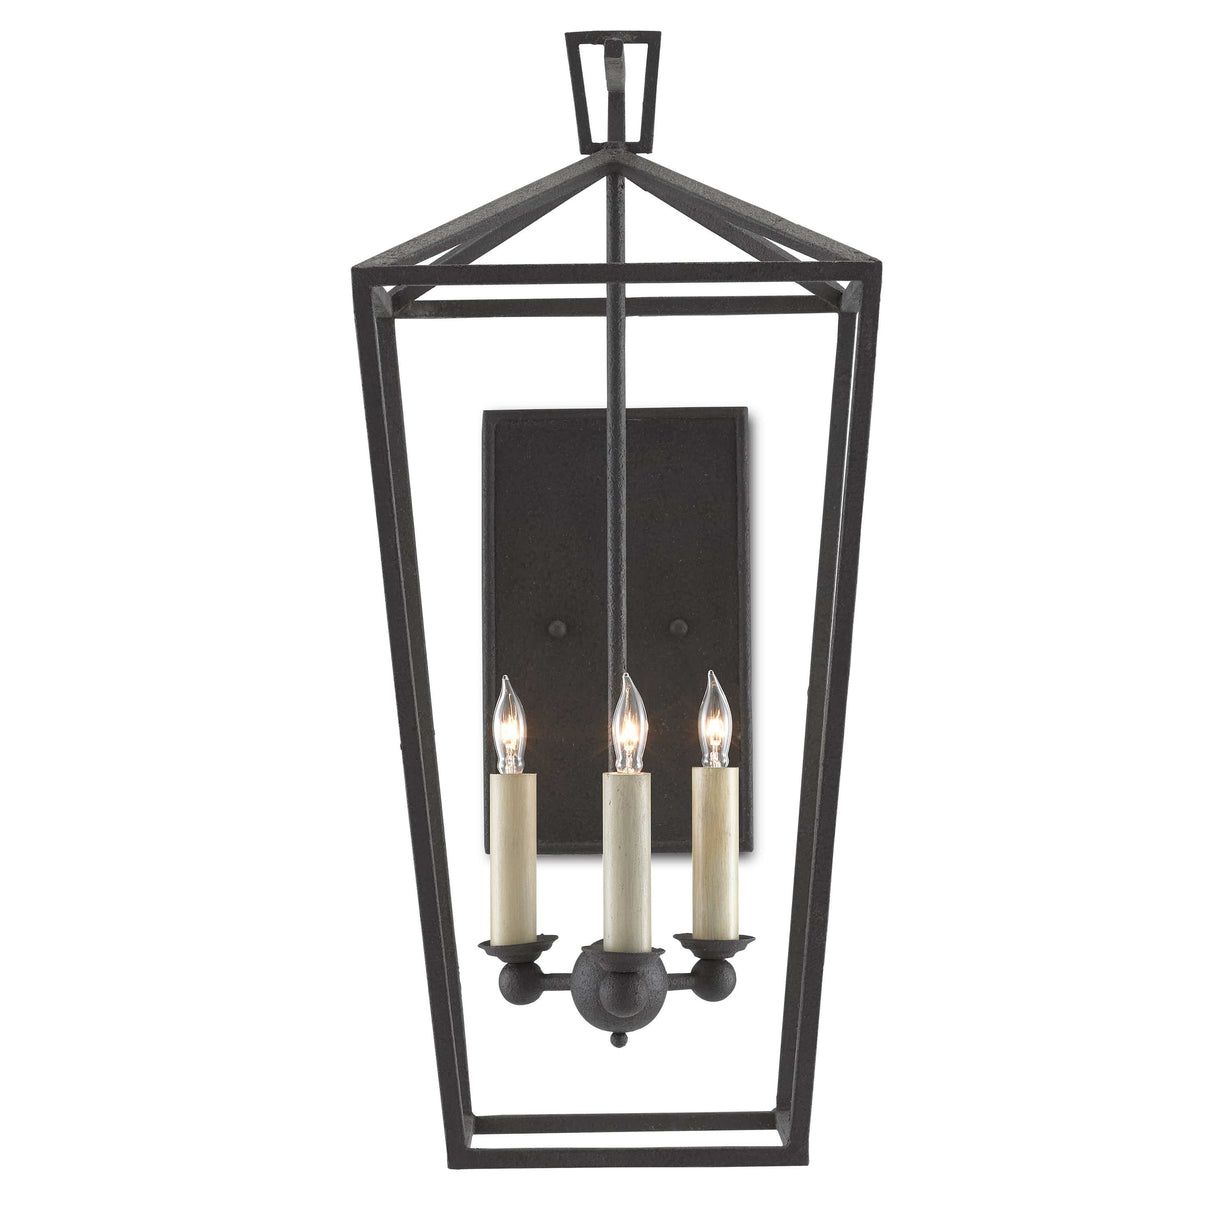 Currey & Company Denison Wall Sconce Lighting currey-co-5000-0169